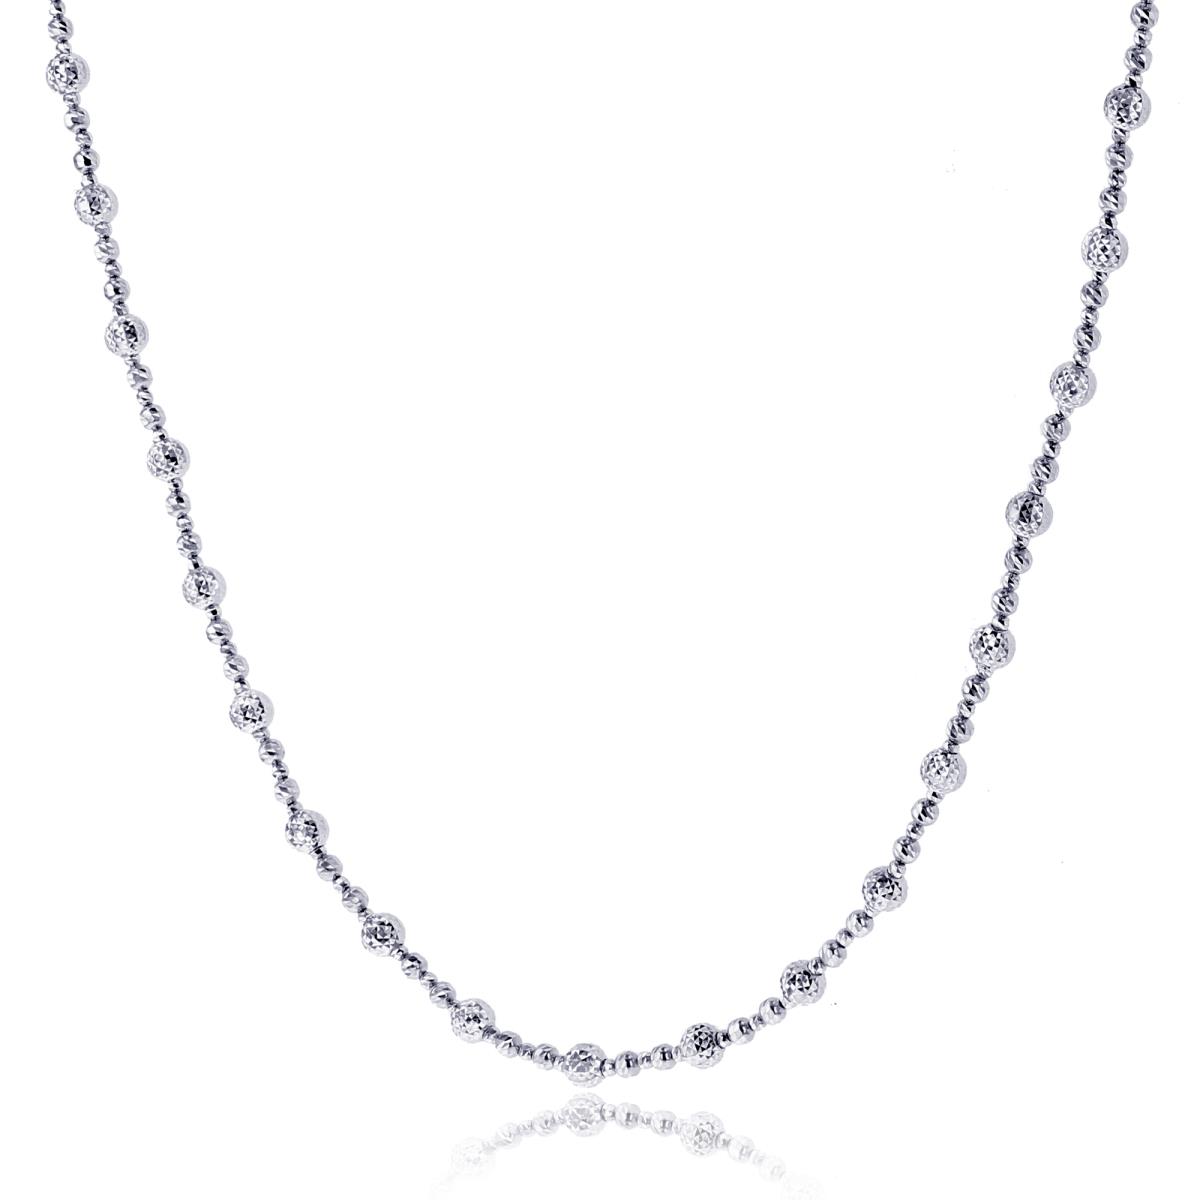 14k White Gold Diamond Cut Bead 18" Necklace with 2 inch Extender